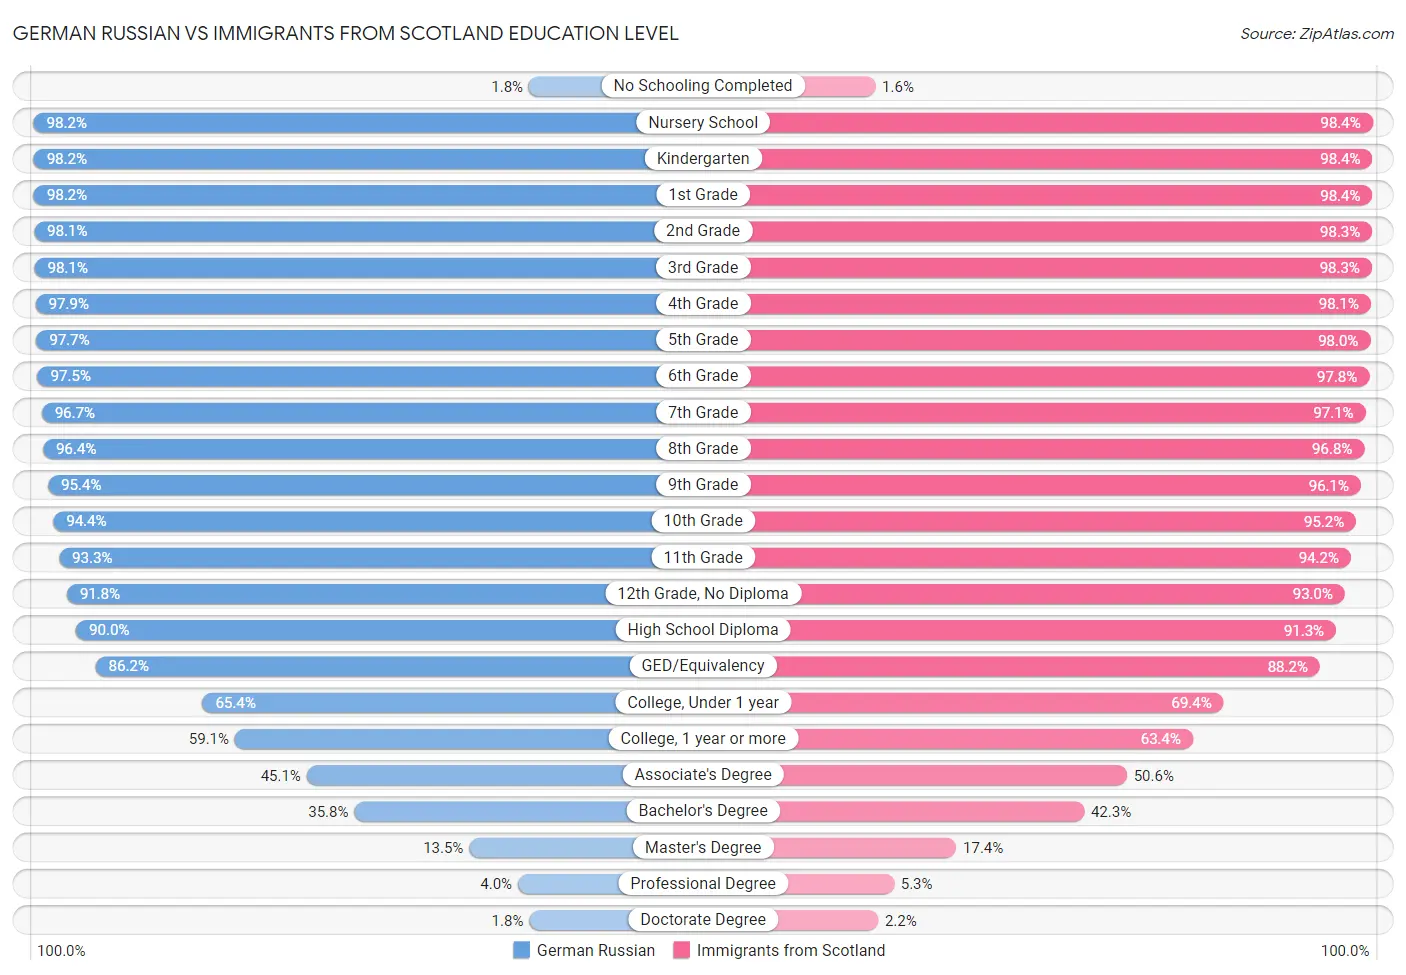 German Russian vs Immigrants from Scotland Education Level